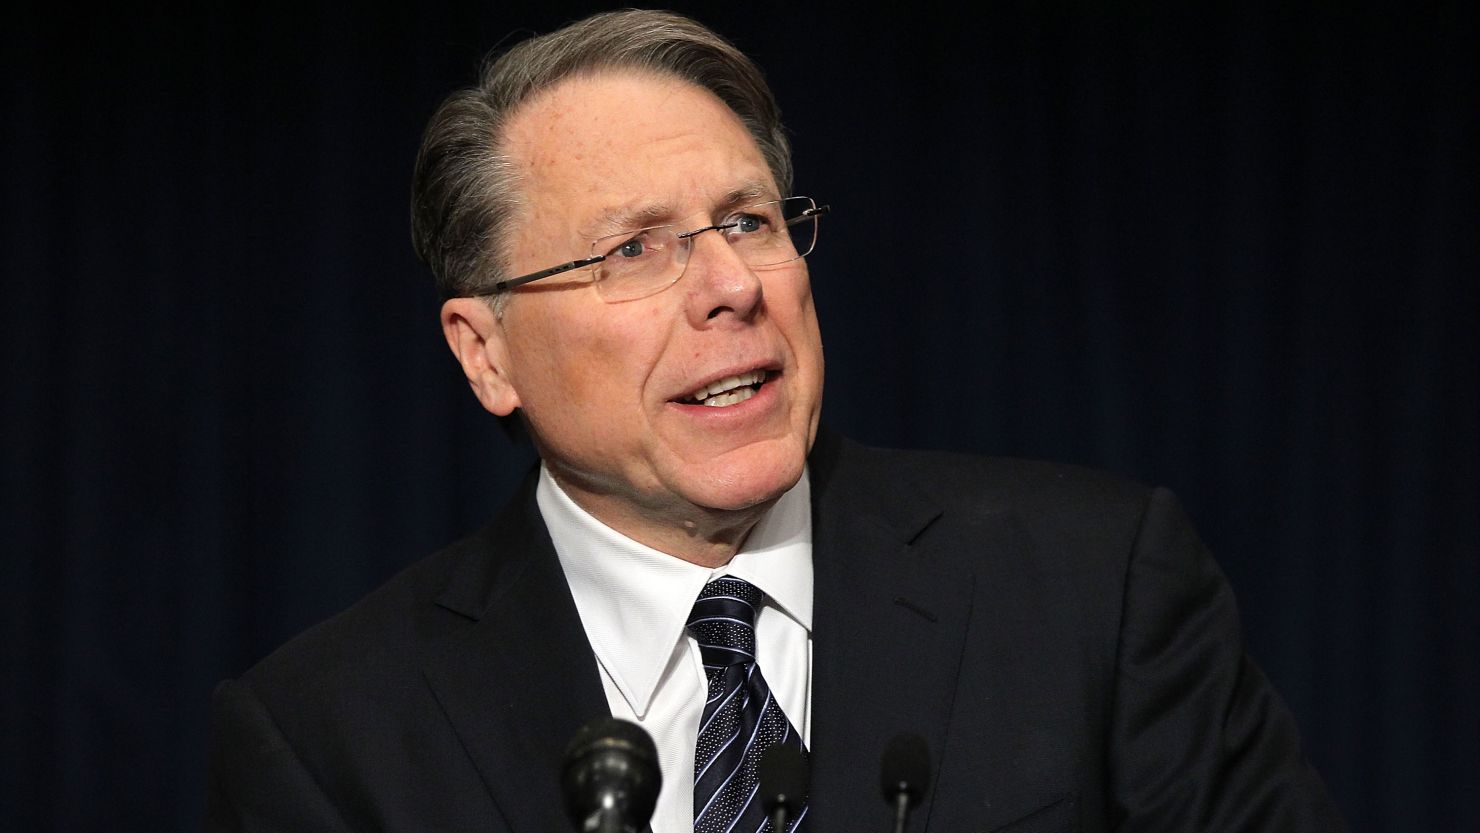 National Rifle Association Executive Vice President Wayne LaPierre calls on Congress to pass a law putting armed police officers in every school in America.